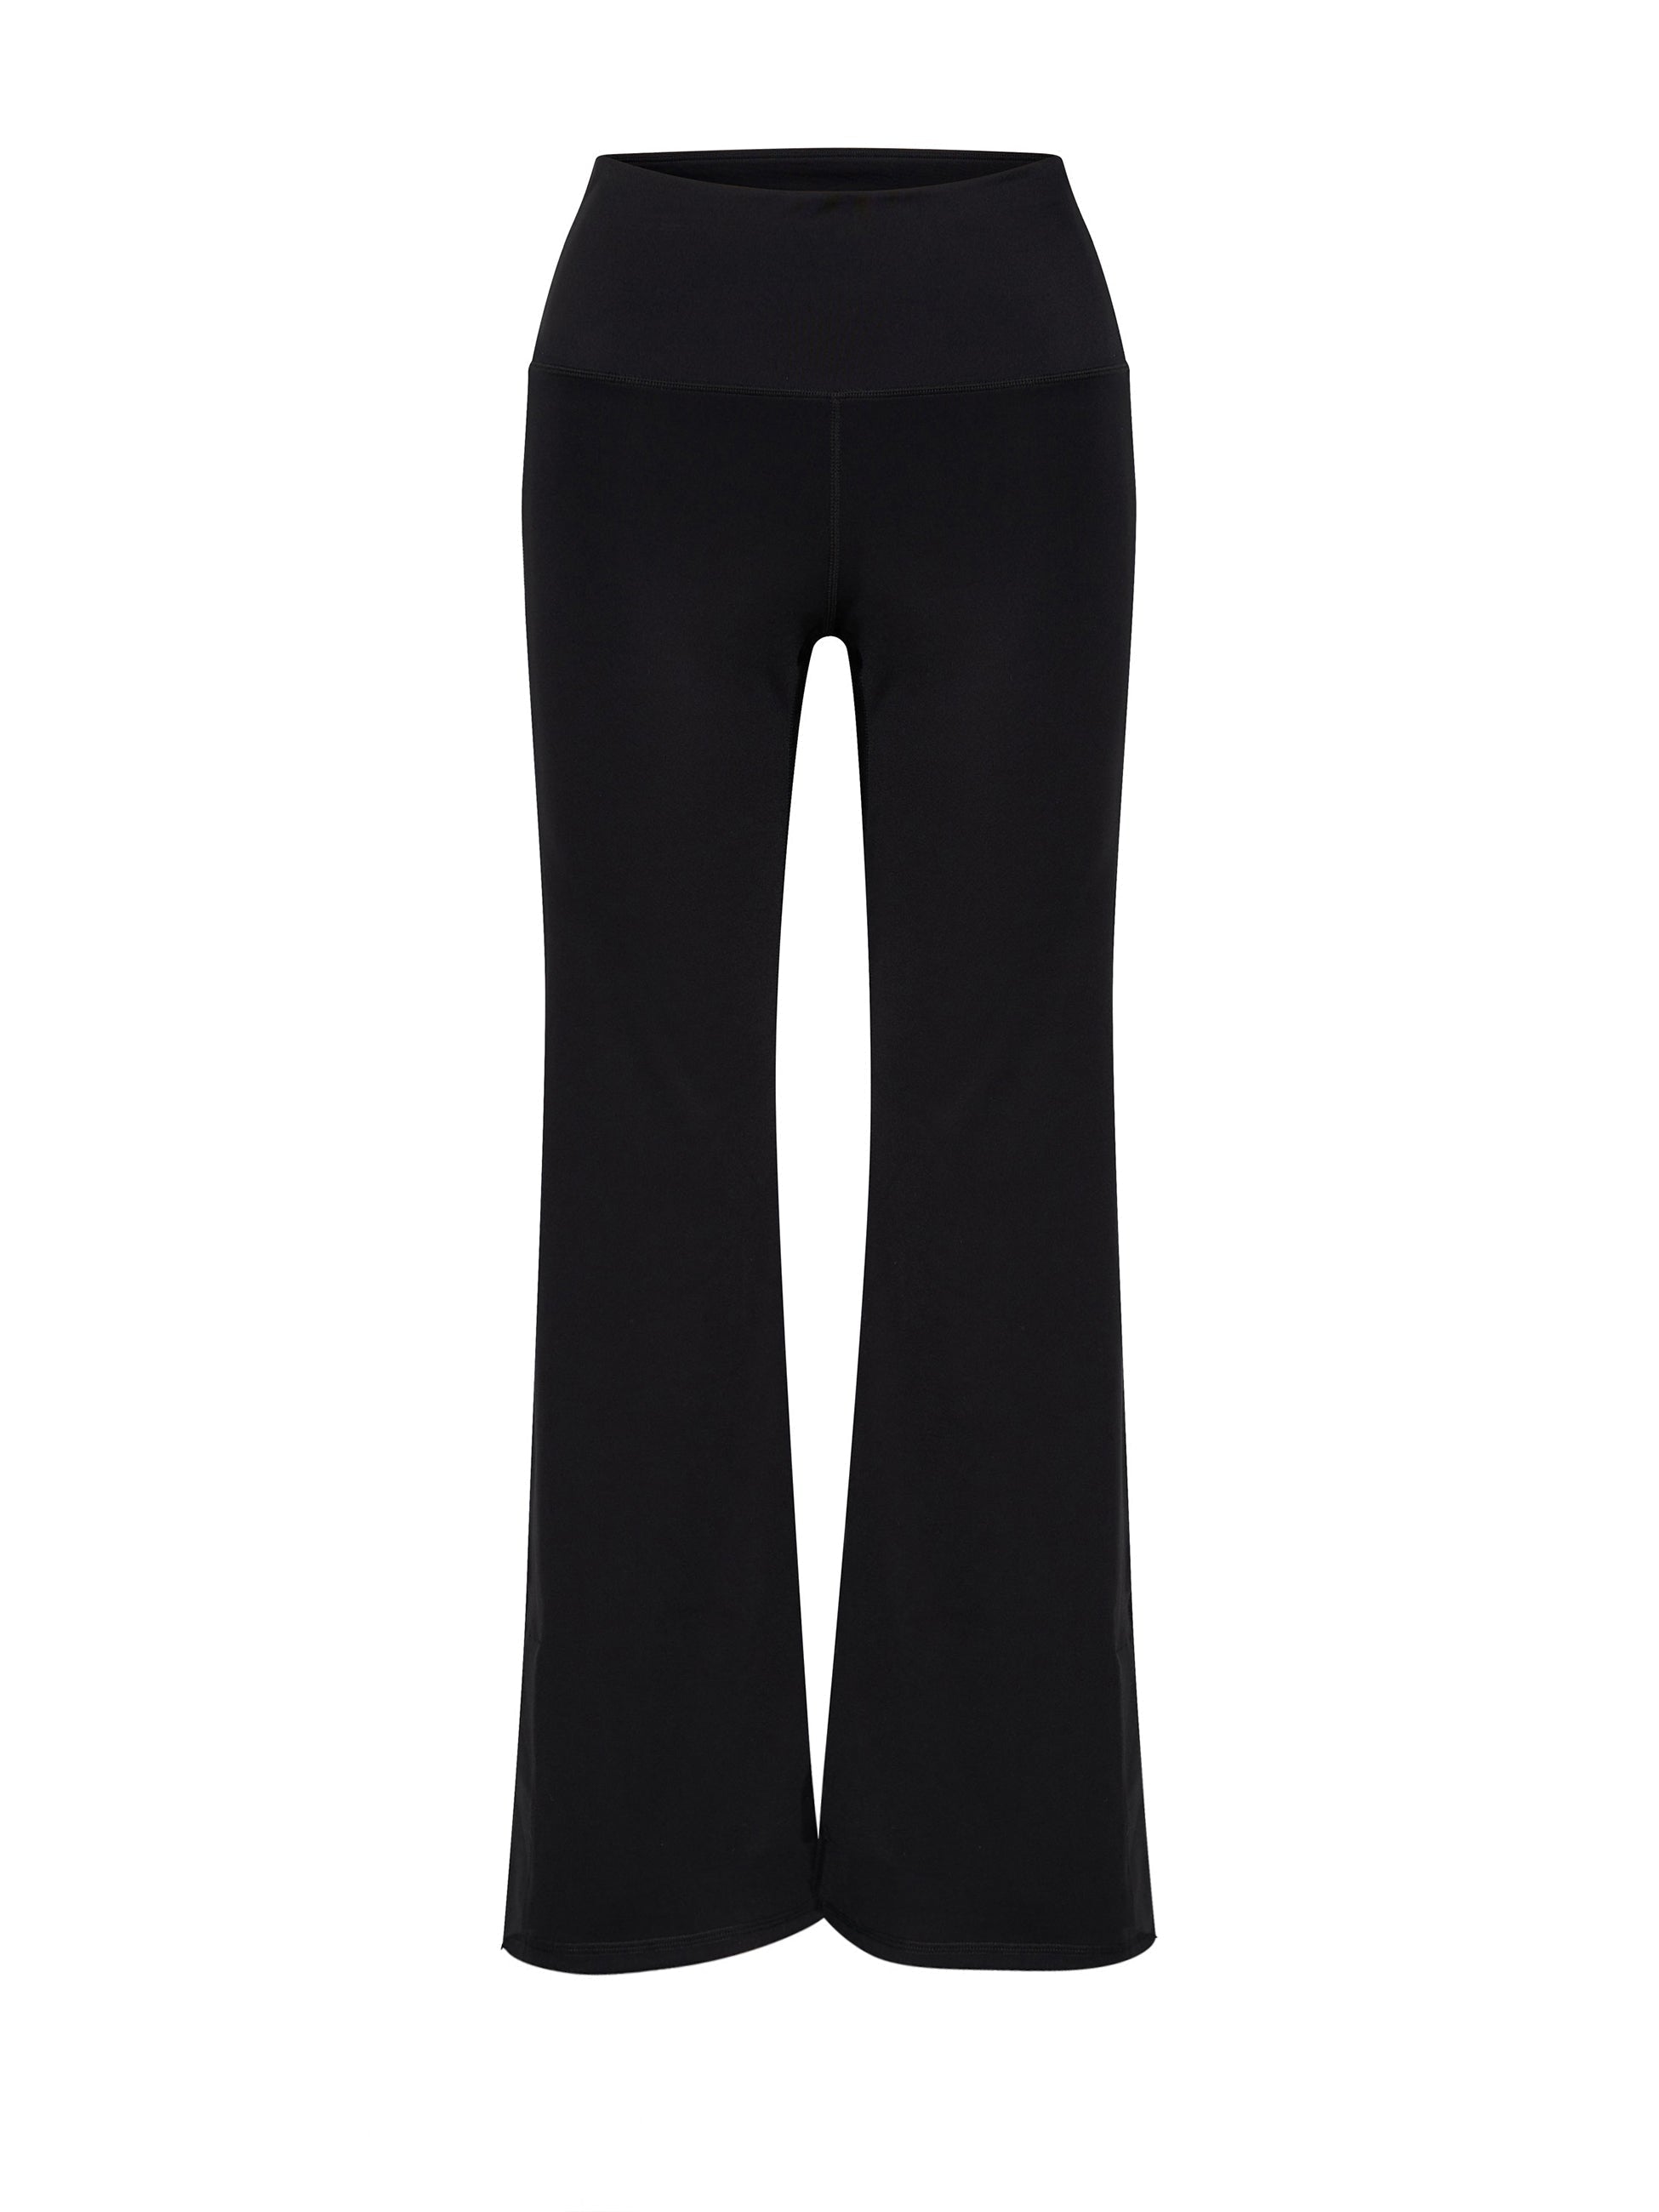 Flare Regular Length Legging - Black, Afterpay Available